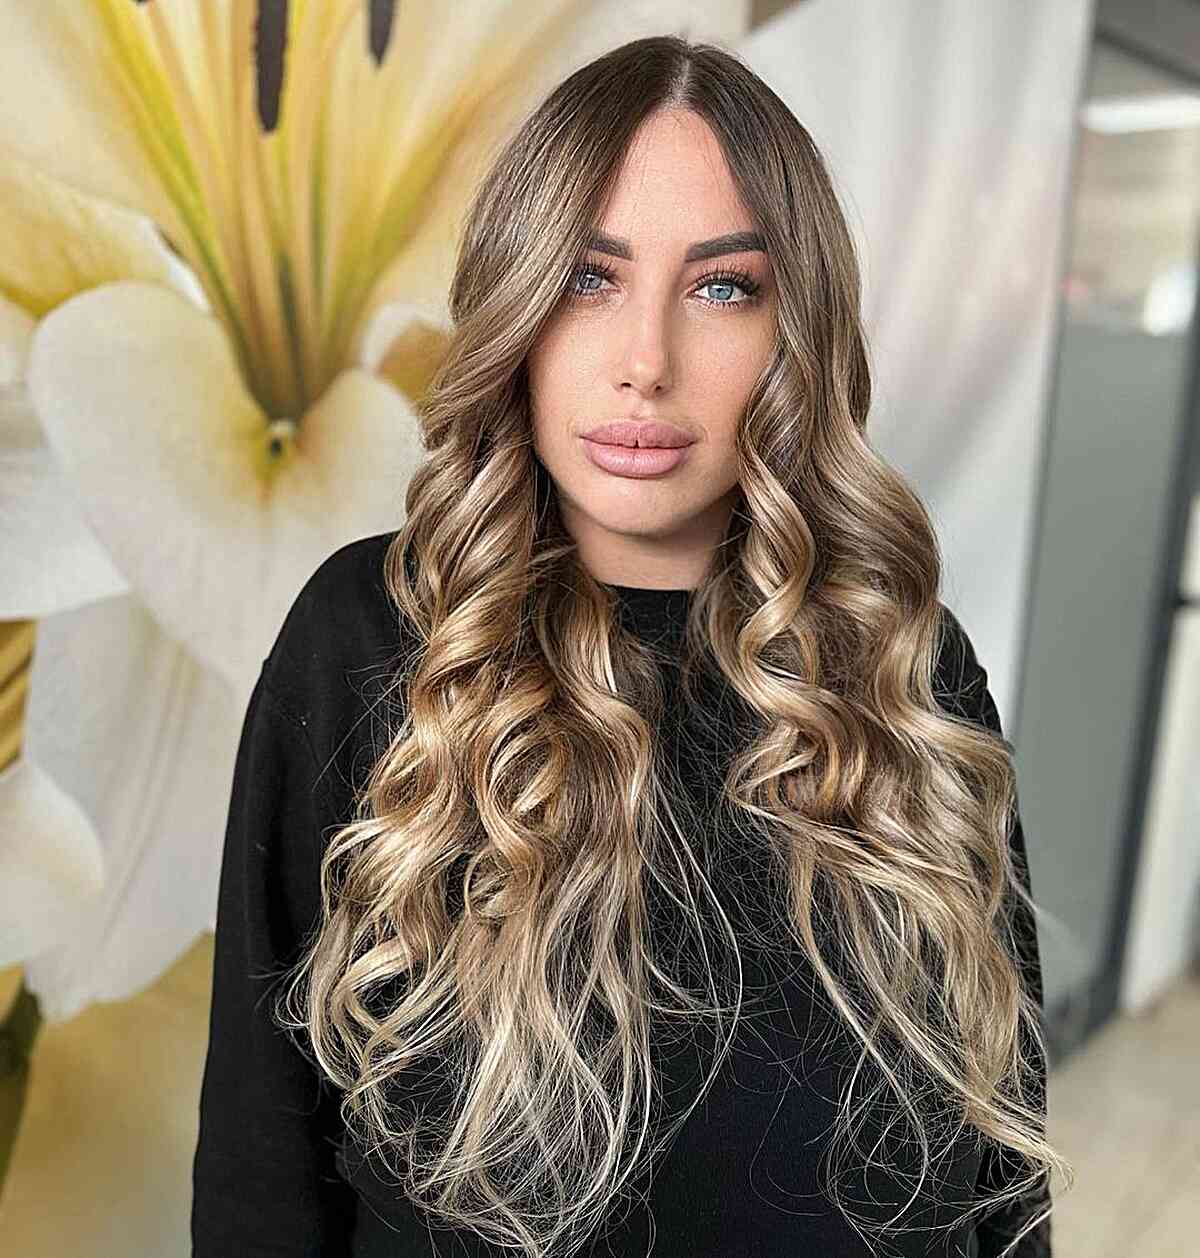 Simple Balayage on Long Hair with wispy ends and curled mid-lengths